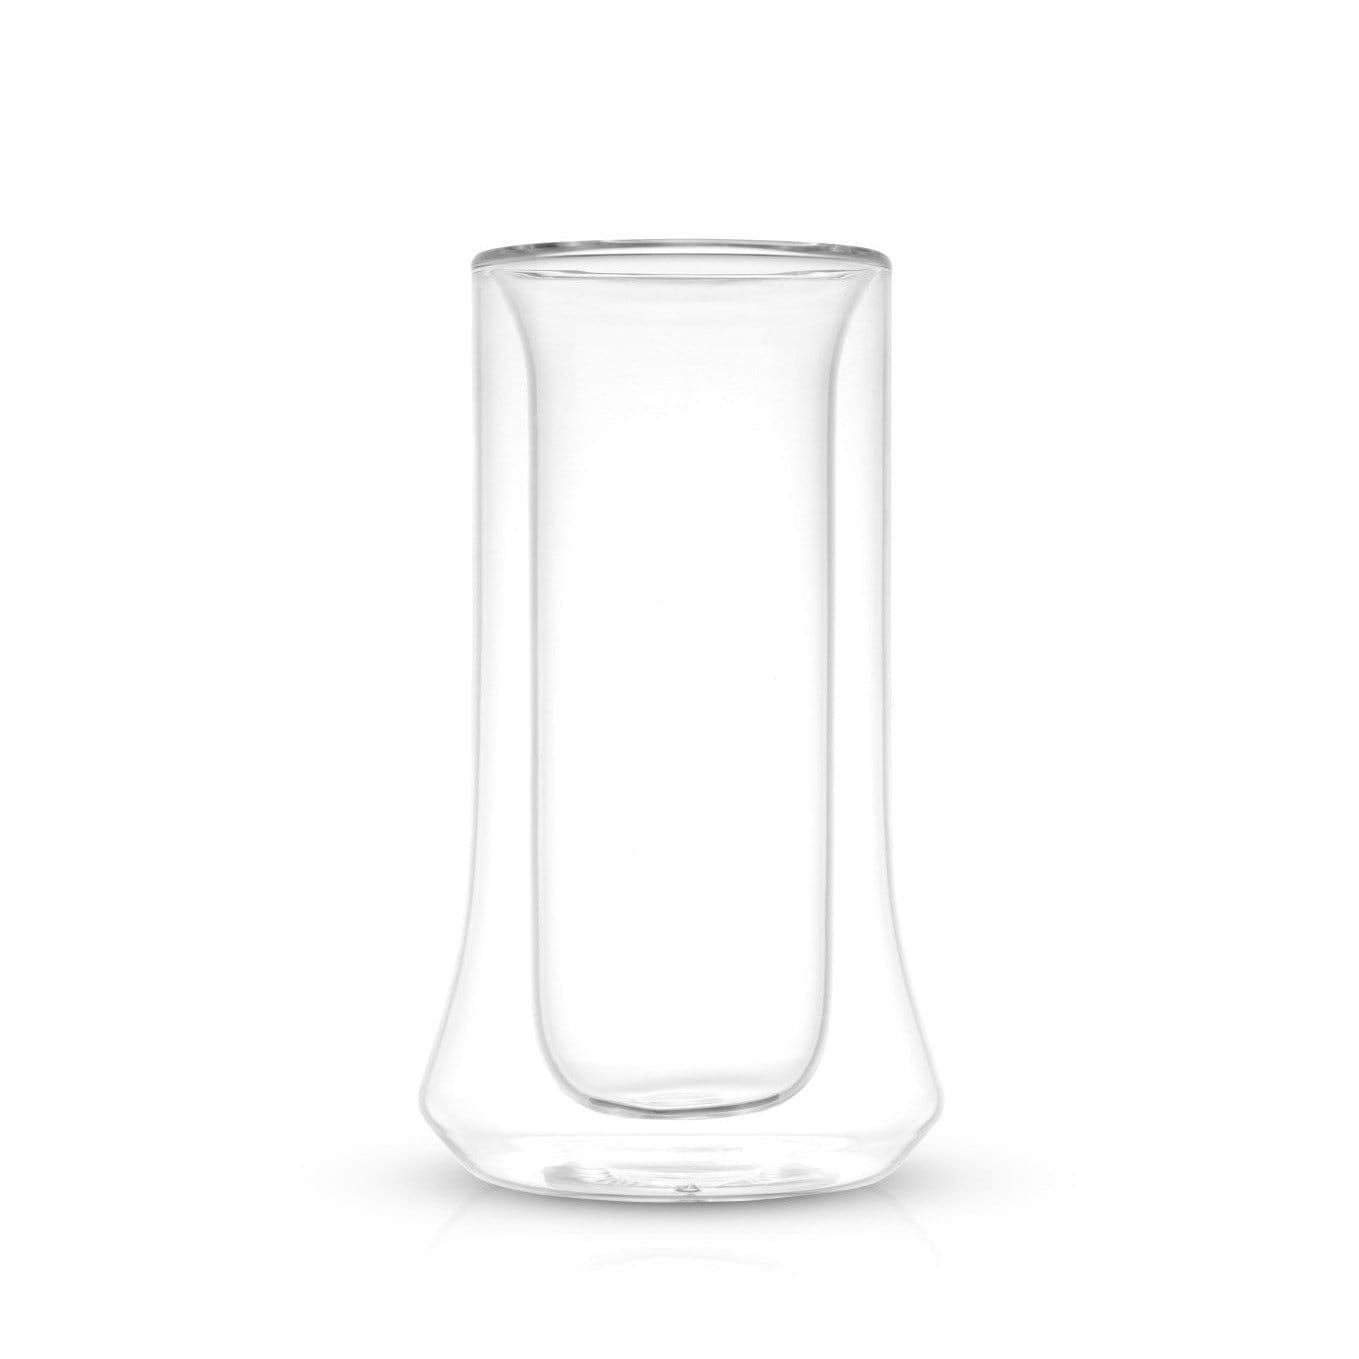 https://ak1.ostkcdn.com/images/products/is/images/direct/89193f406d713d8d42d81c332cd564ec0228b572/JoyJolt-Cosmo-Insulated-Double-Wall-Highball-Glass--10-oz---Set-of-2.jpg